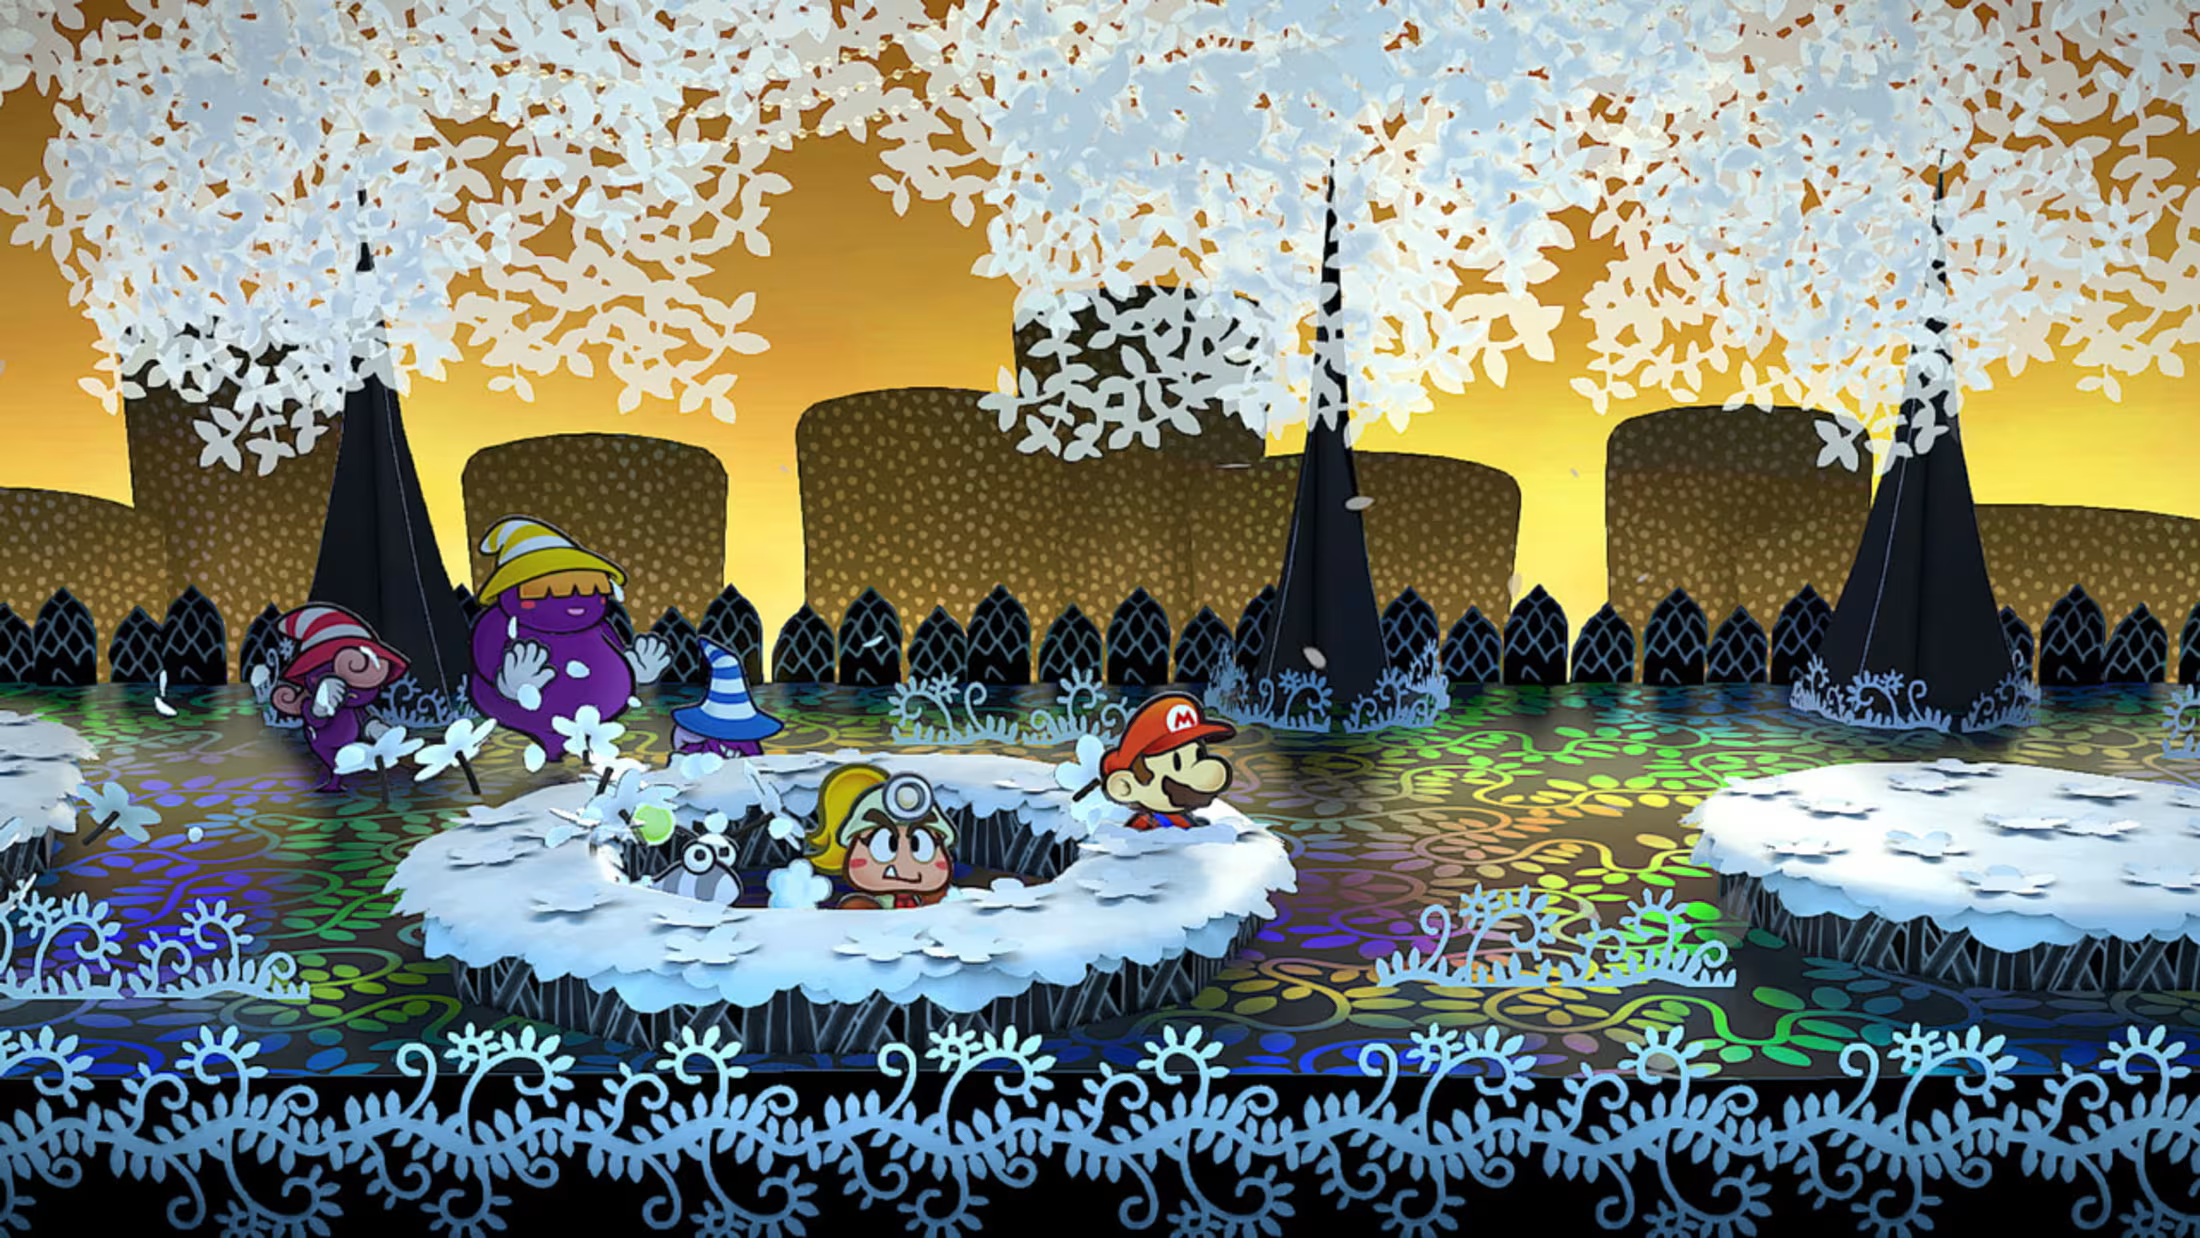 A screenshot from Paper Mario: The Thousand-Year Door